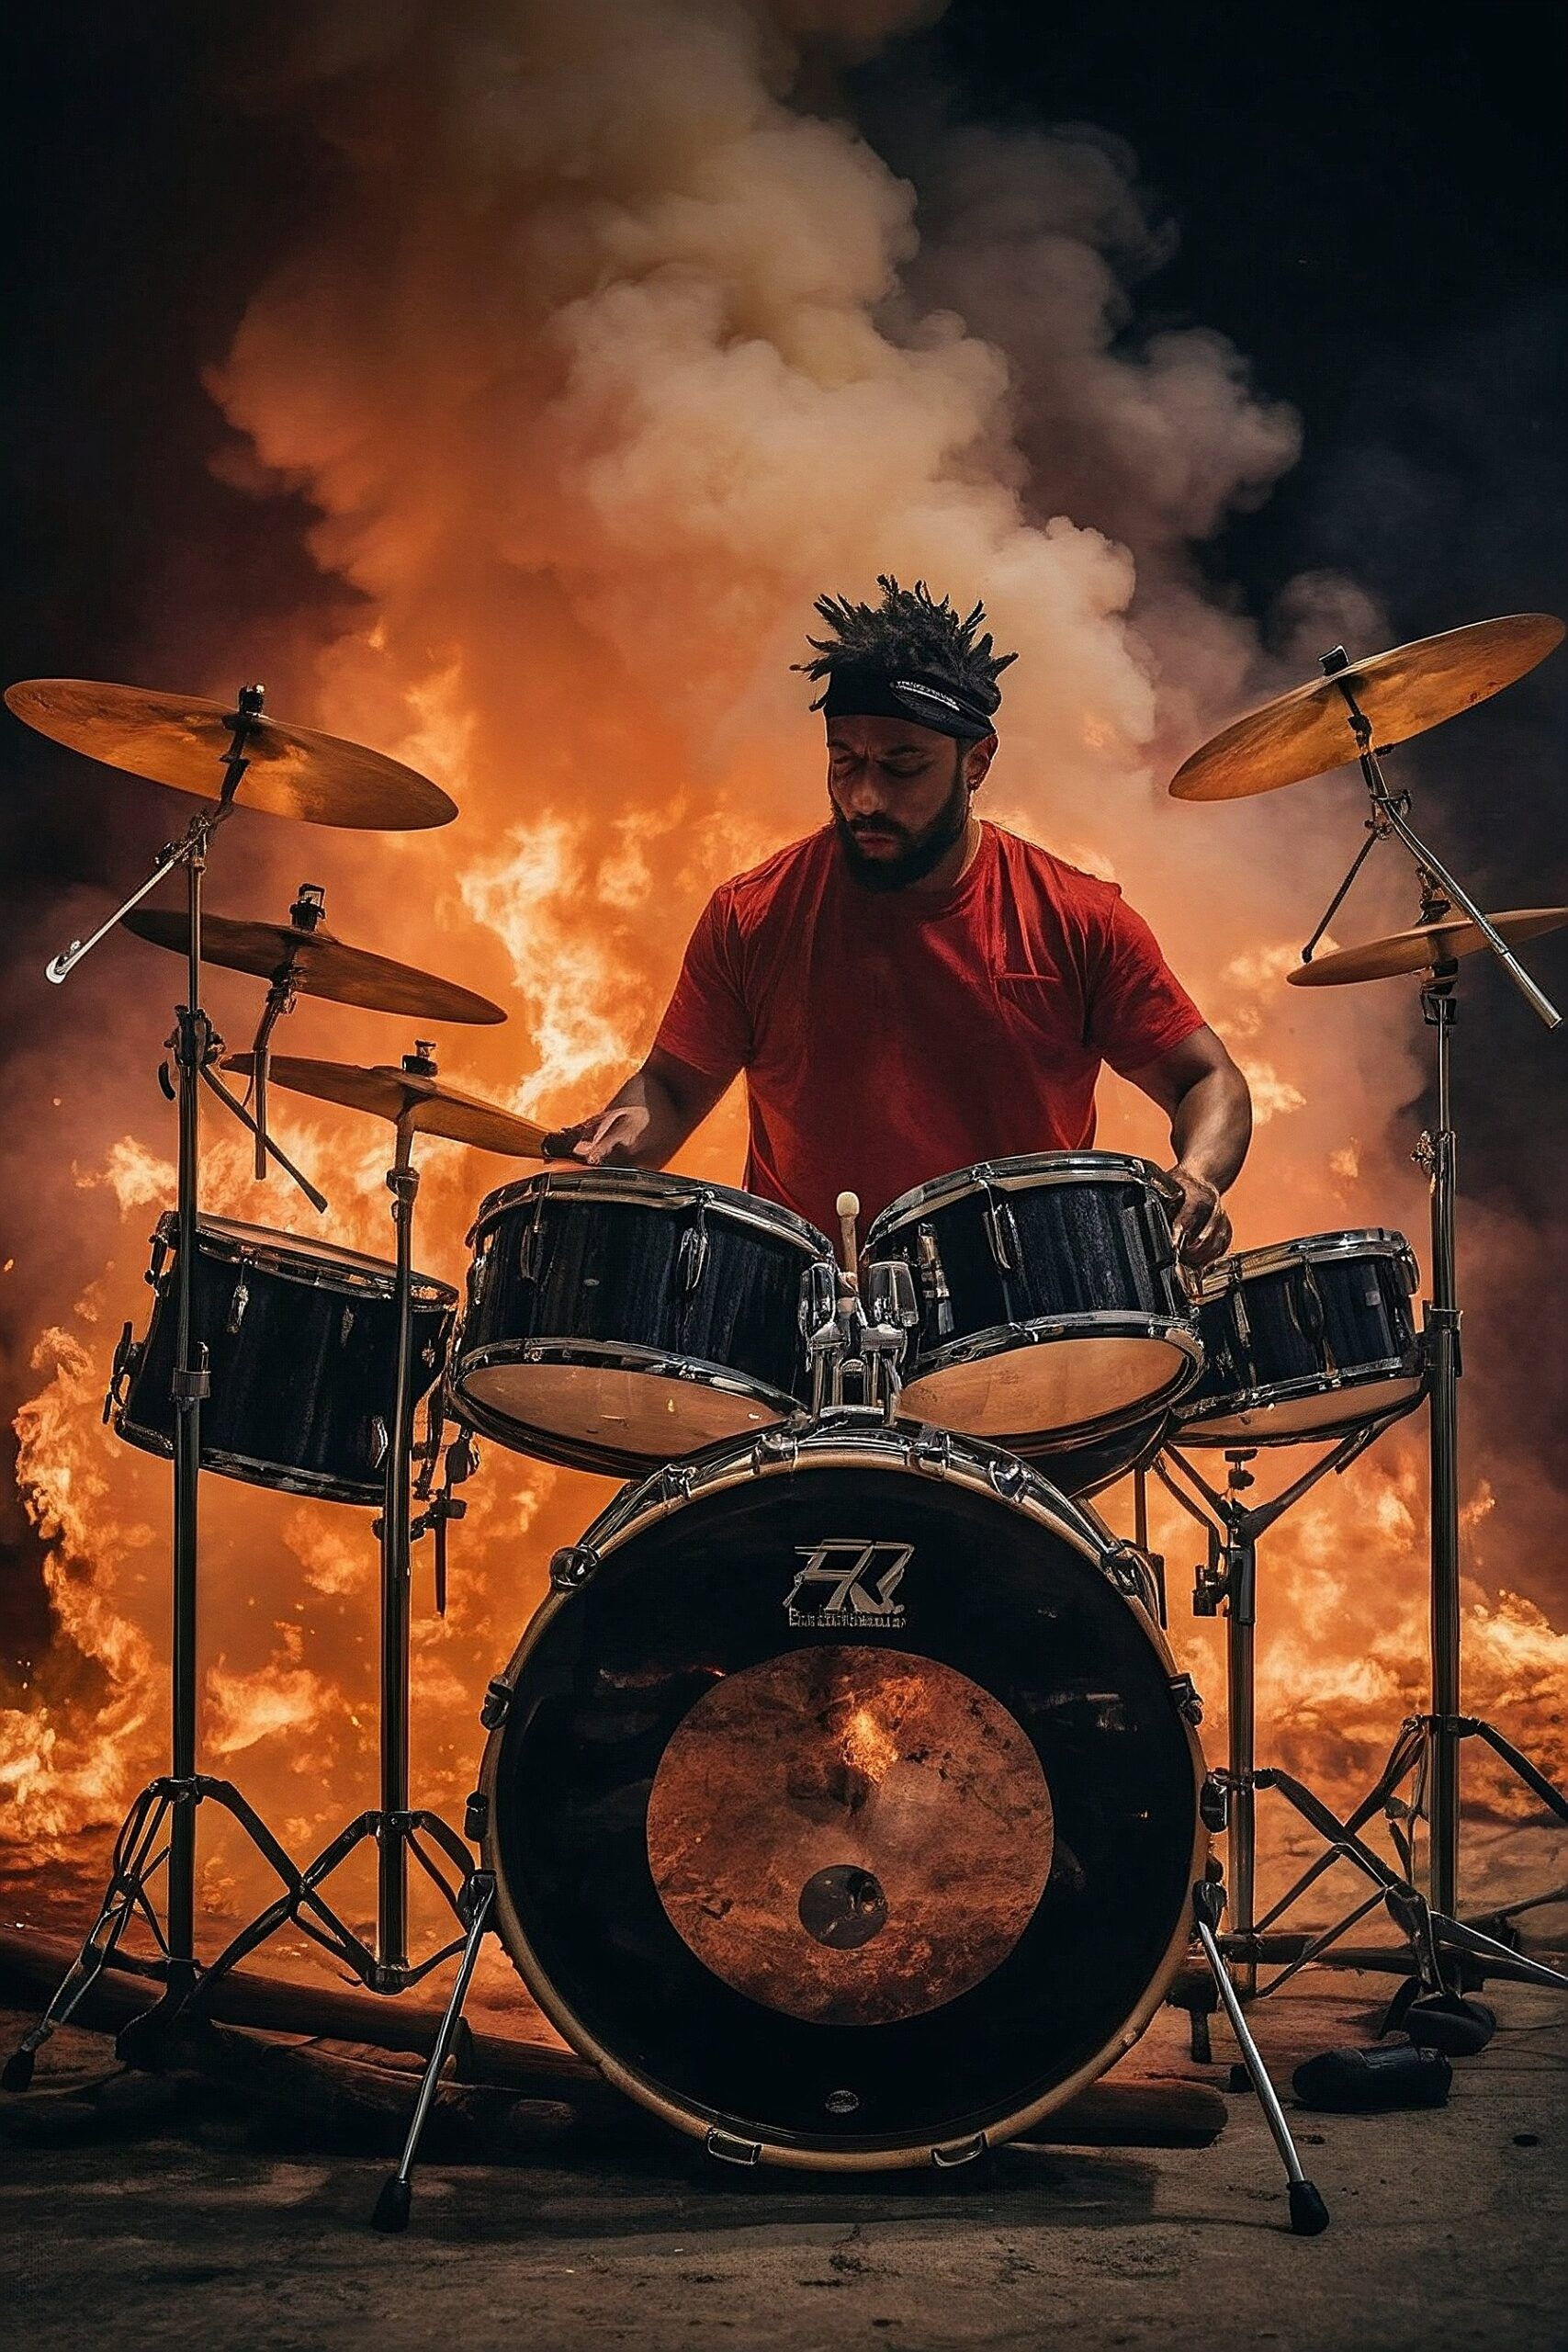 Default A fierce drummer stands in front of a raging inferno t 1 f577adff 7f2f 4ce4 81eb 074971baa0a9 0 scaled fb54dcc8